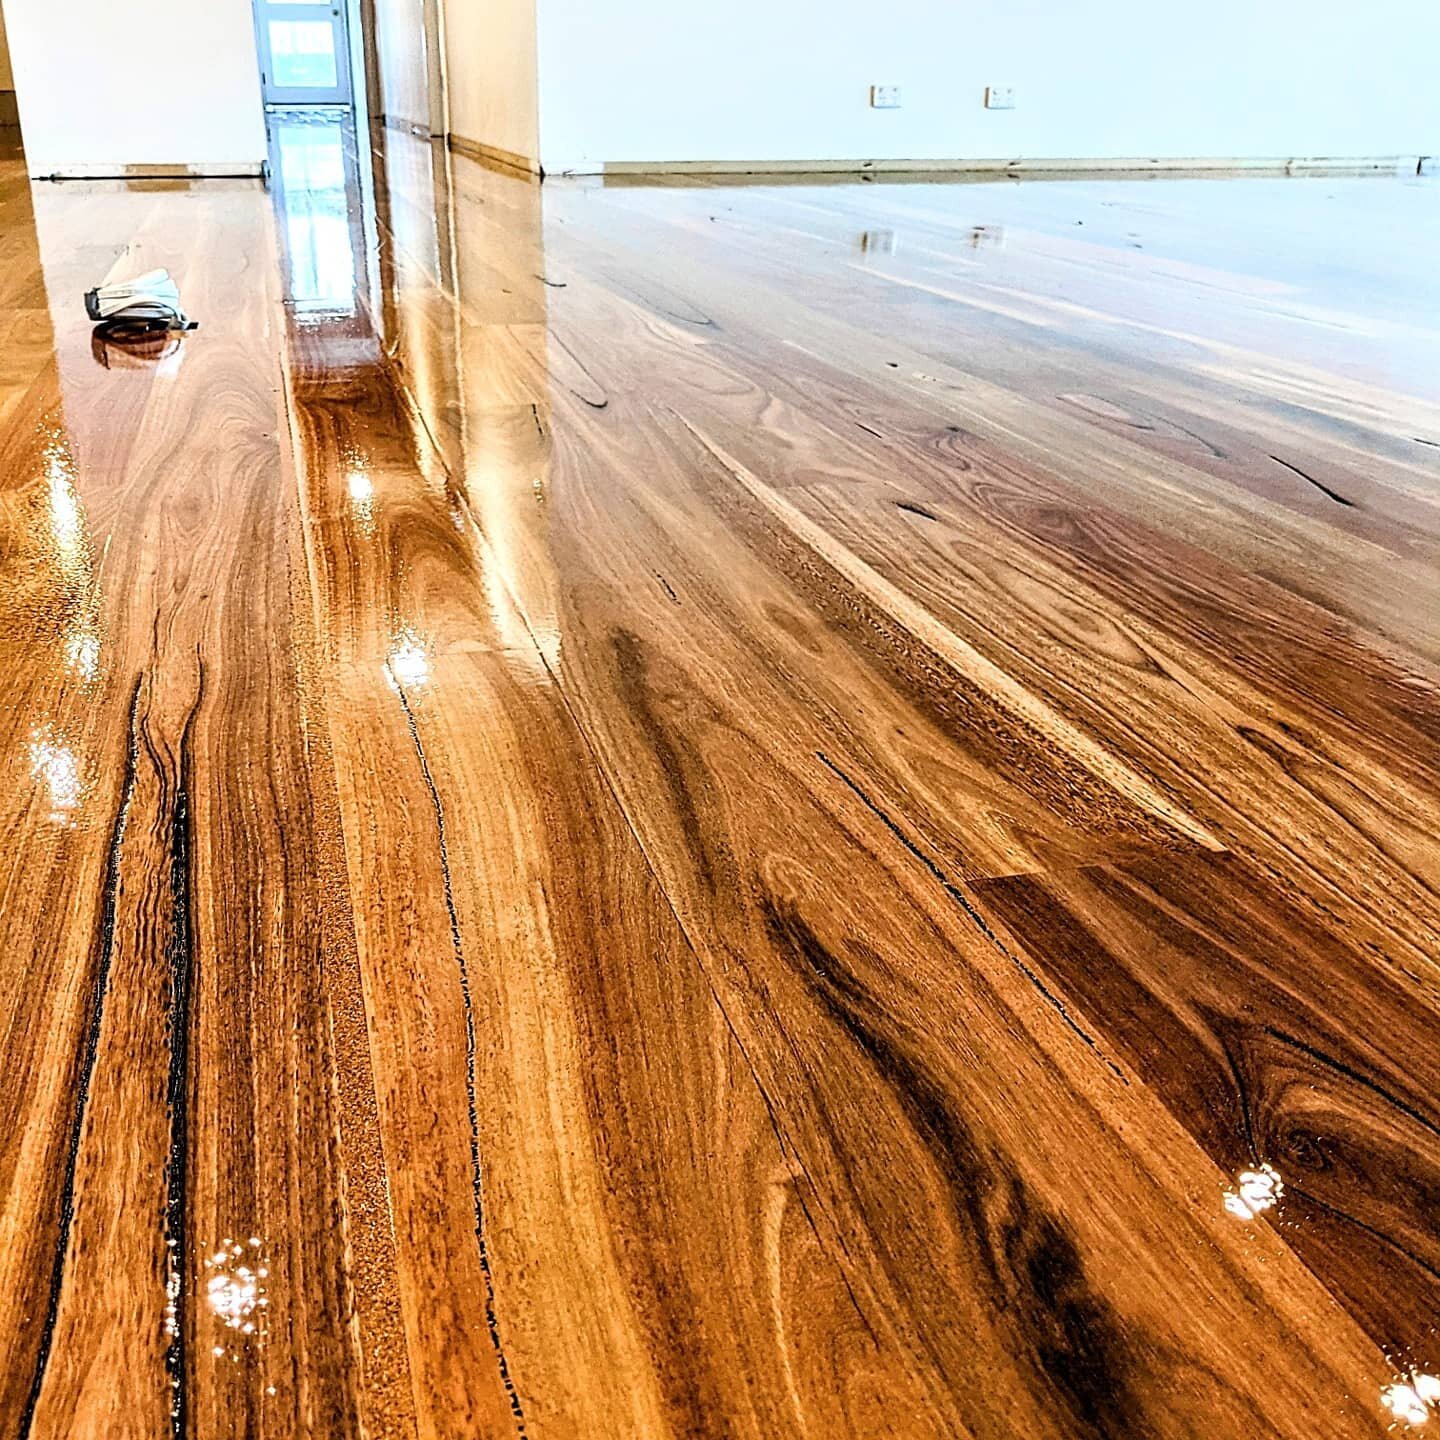 100% Australian!! Queensland Spotted Gum in natural grade, finished with Aussie made water based coating. When dry this wet coating will be a satin sheen. 100% beautiful.
#timberoo_flooring_specialist #boraltimber #polycure #timberflooringsunshinecoa